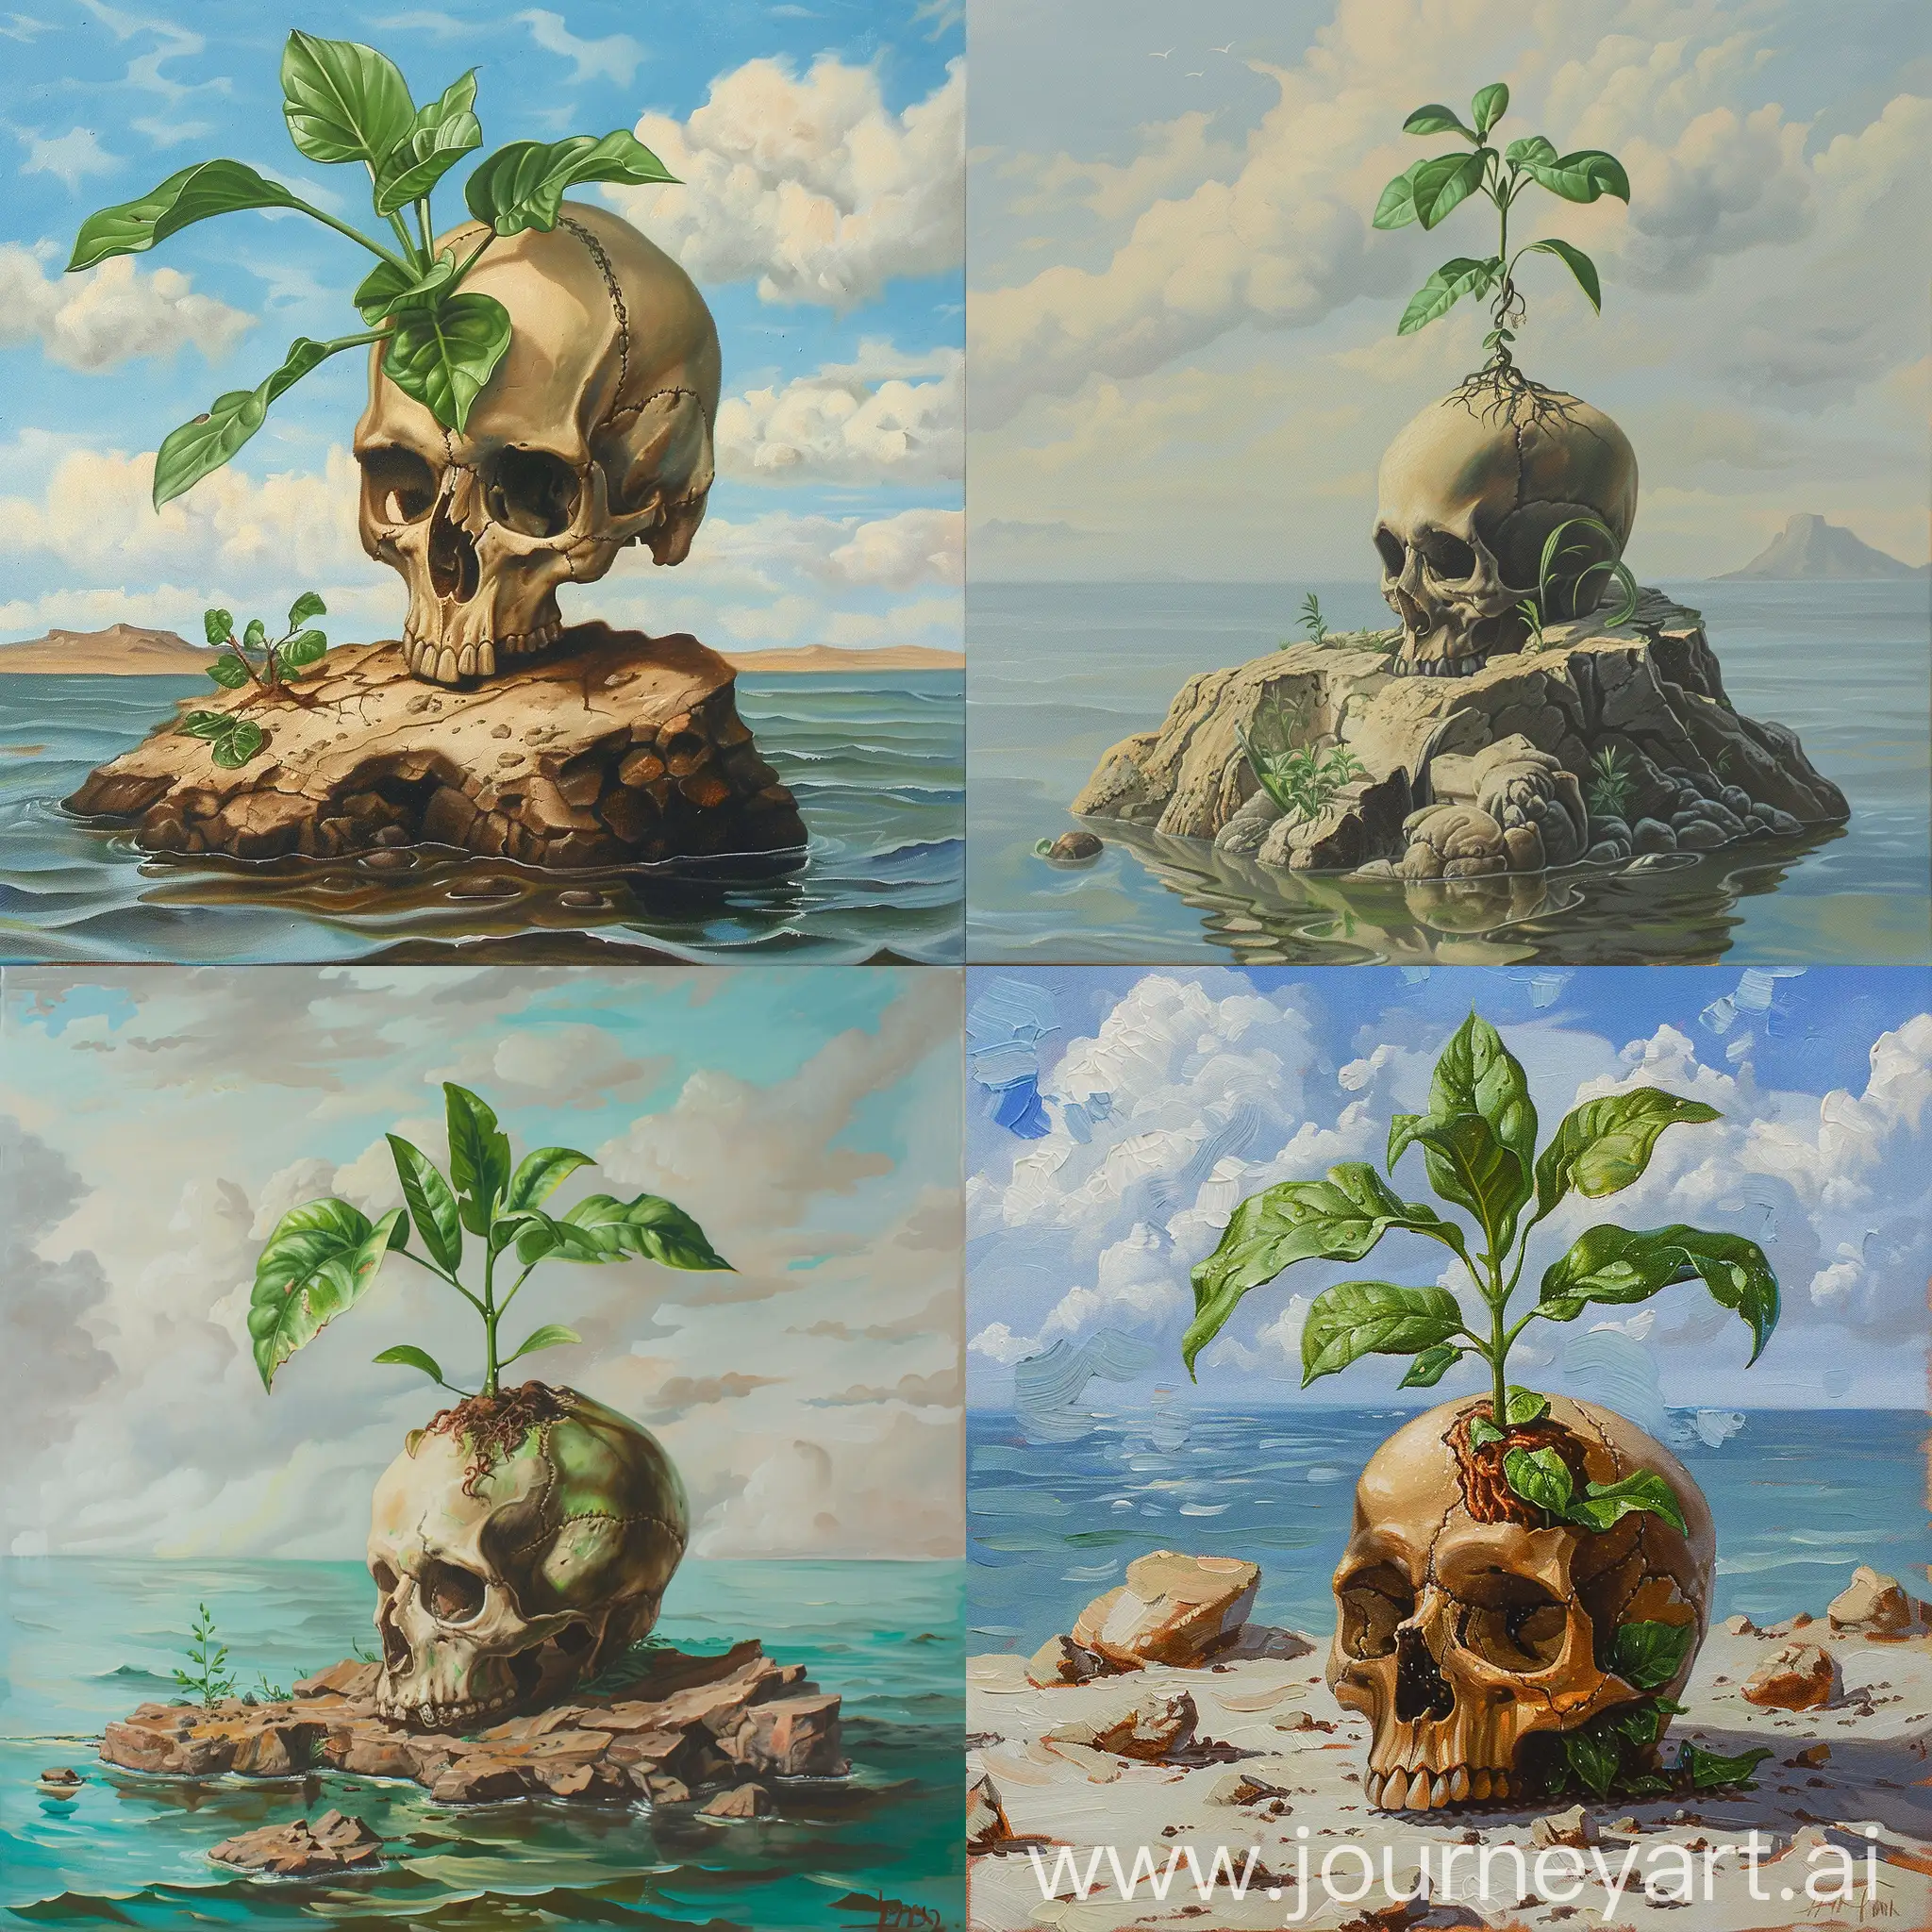 An oil panting of green plant growing from a human skull sitting in a deserted island